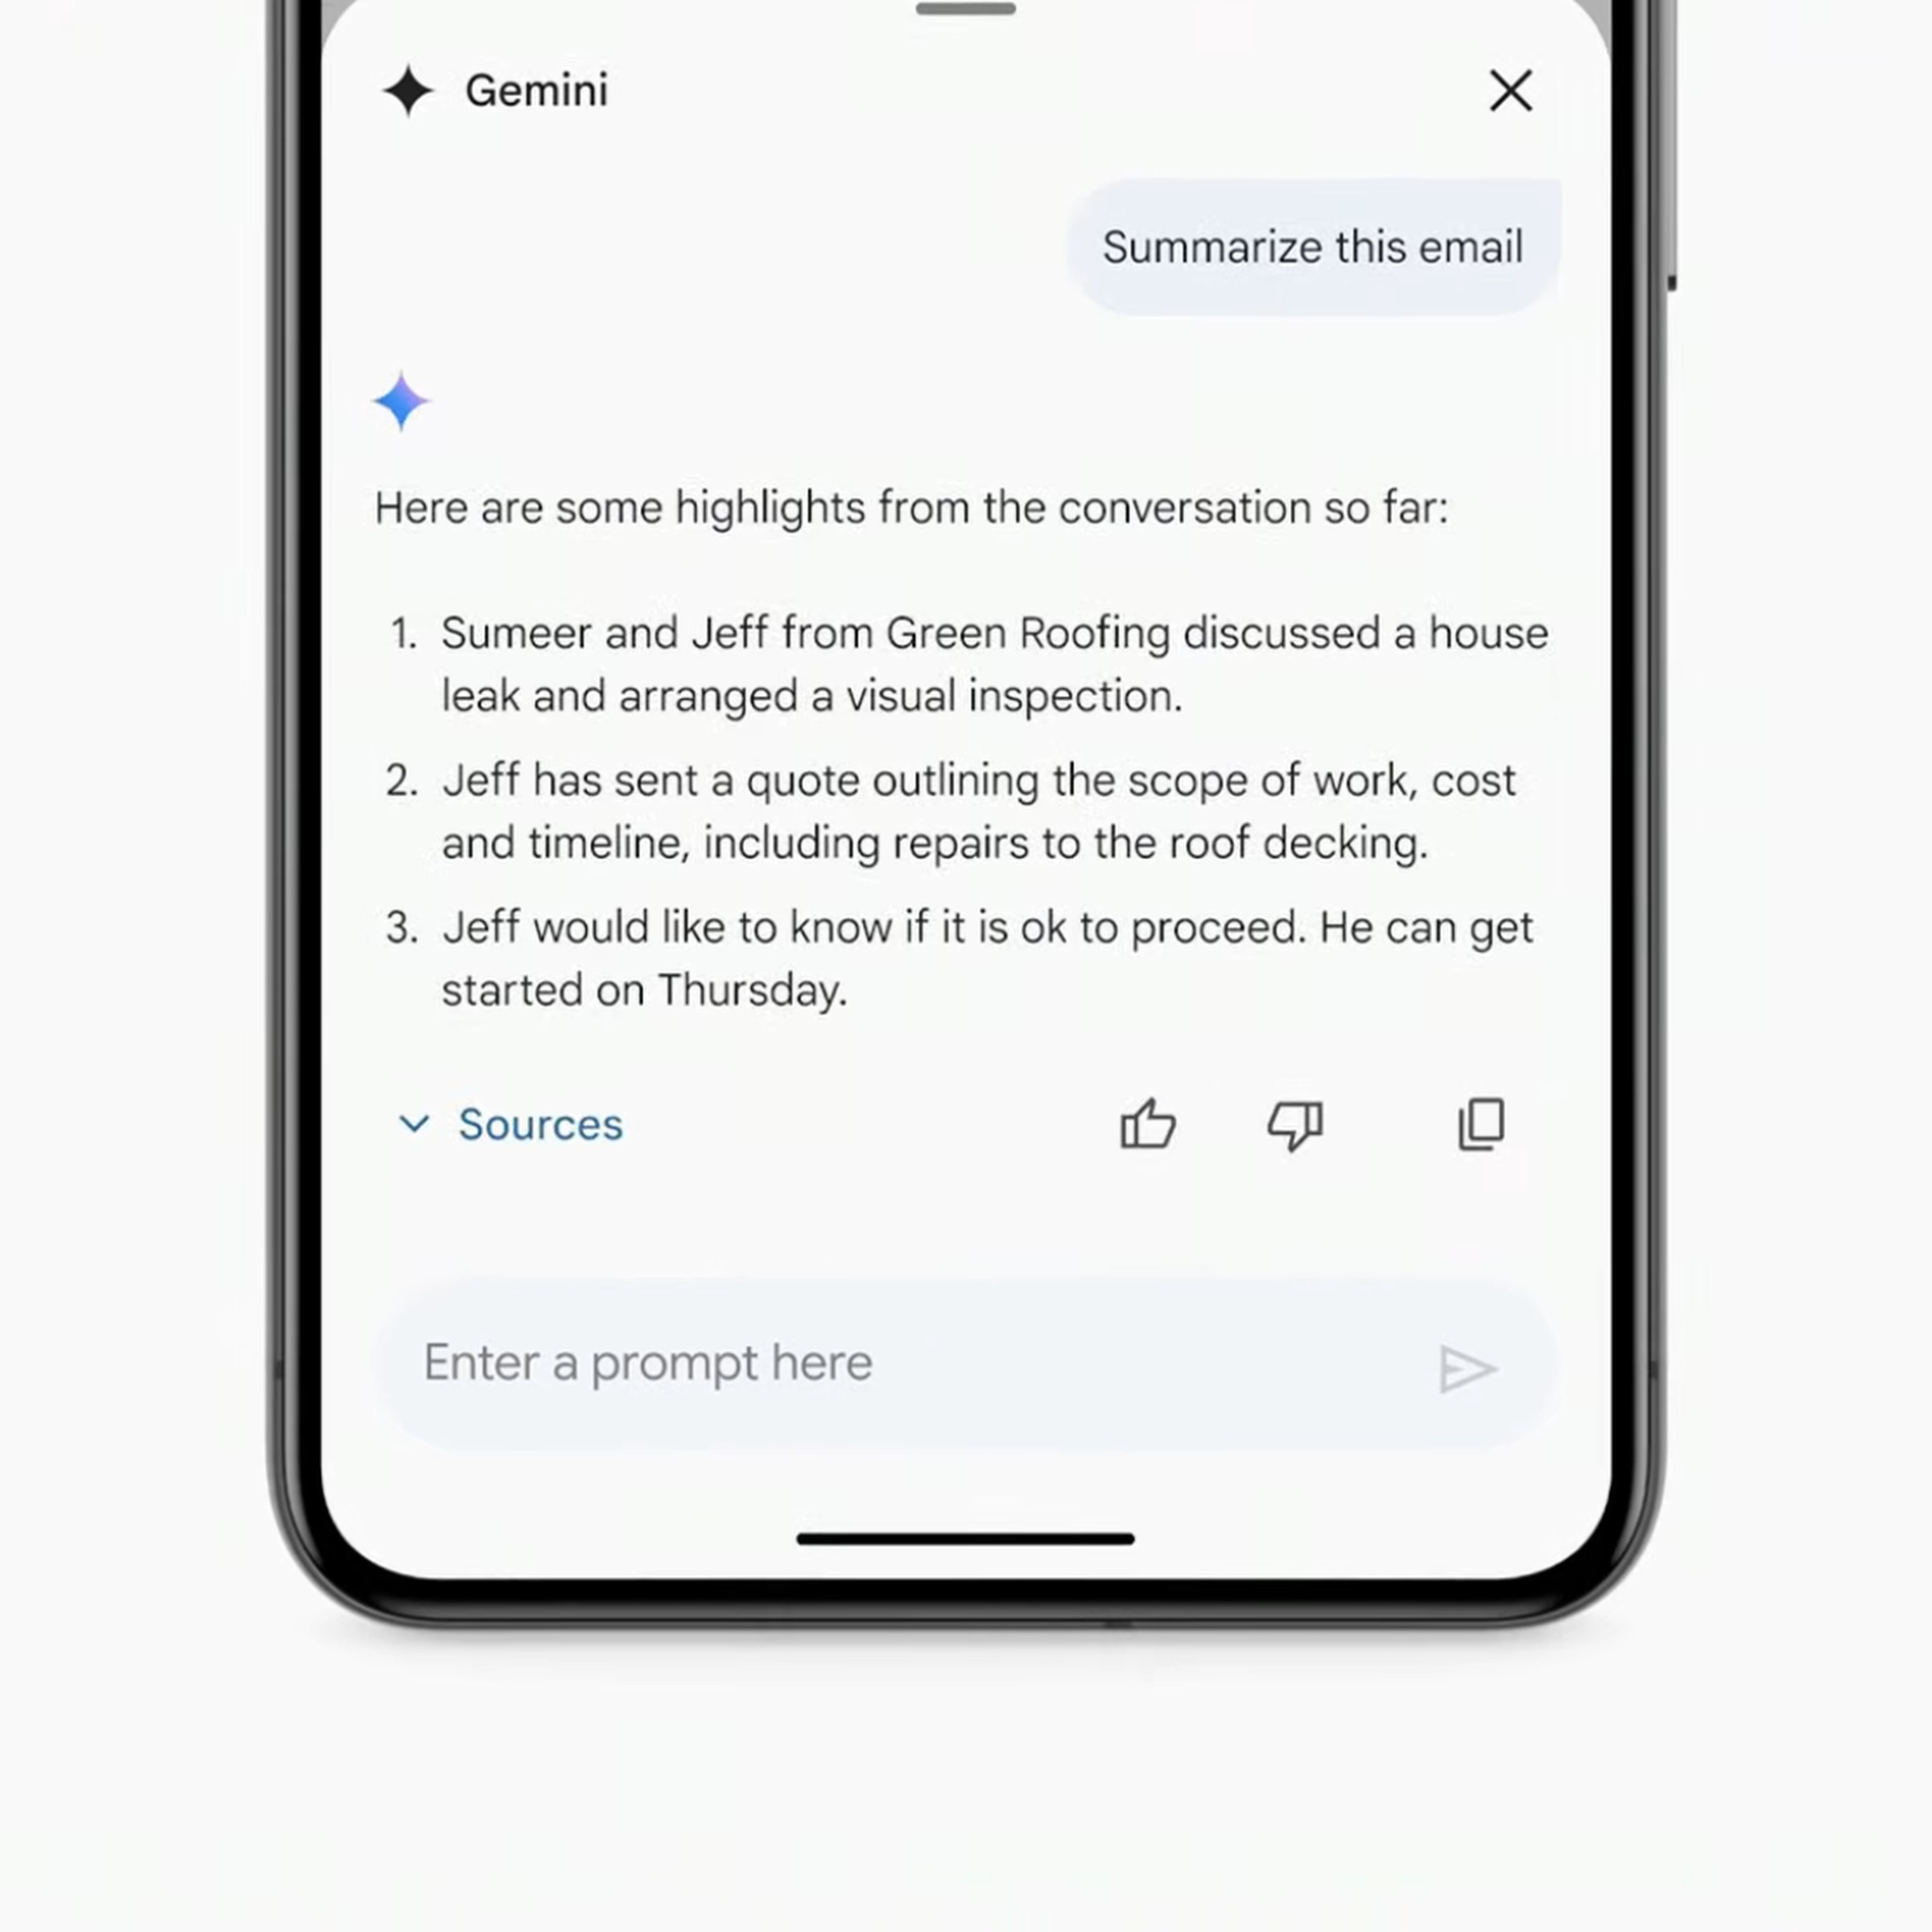 Screenshot showing a summary of an email thread provided by Gemini in the Gmail app.